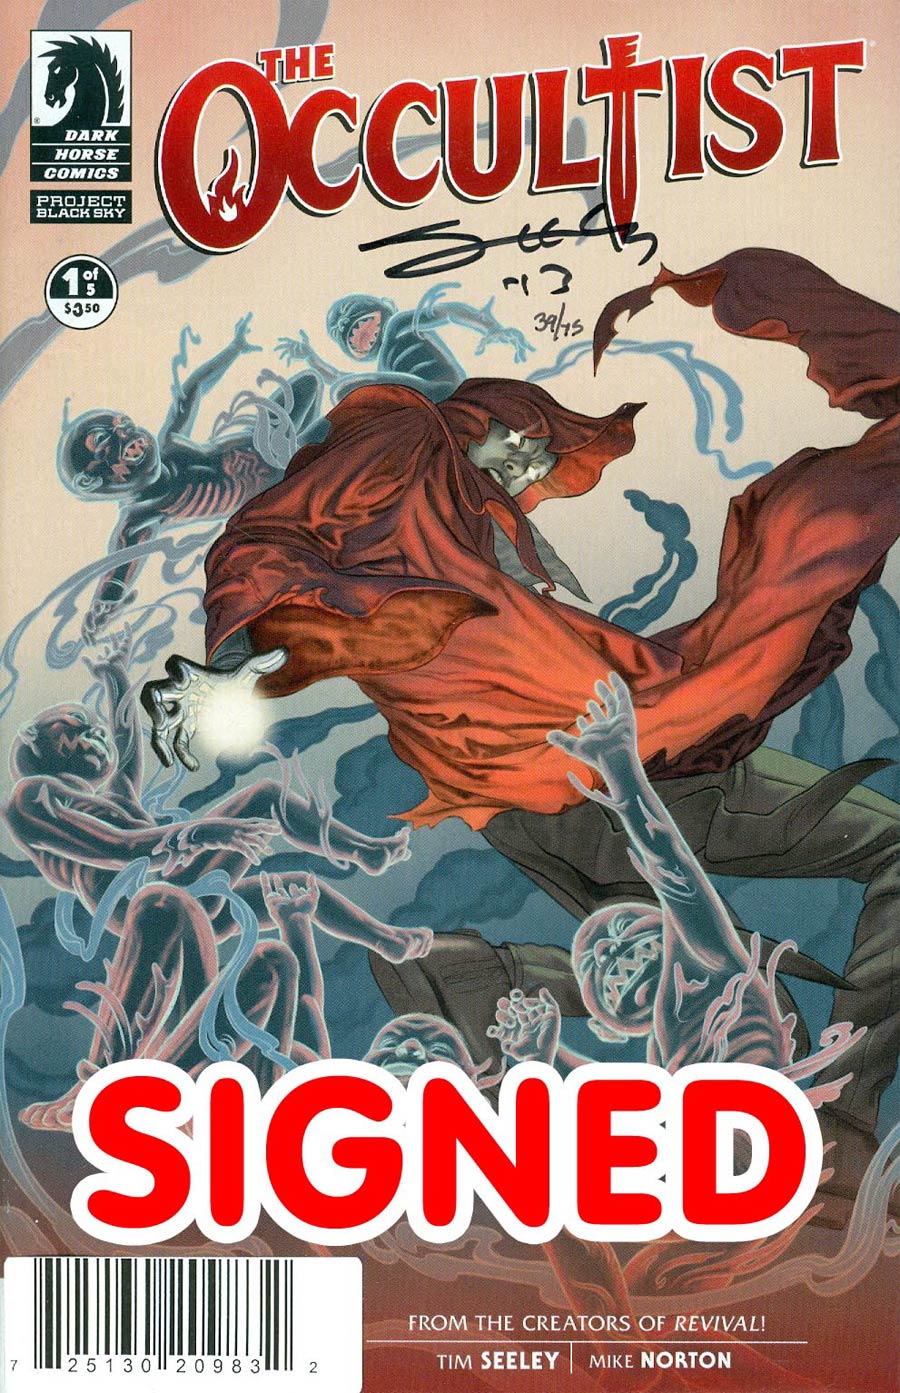 Occultist Vol 3 #1 Cover C DF Signed By Tim Seeley